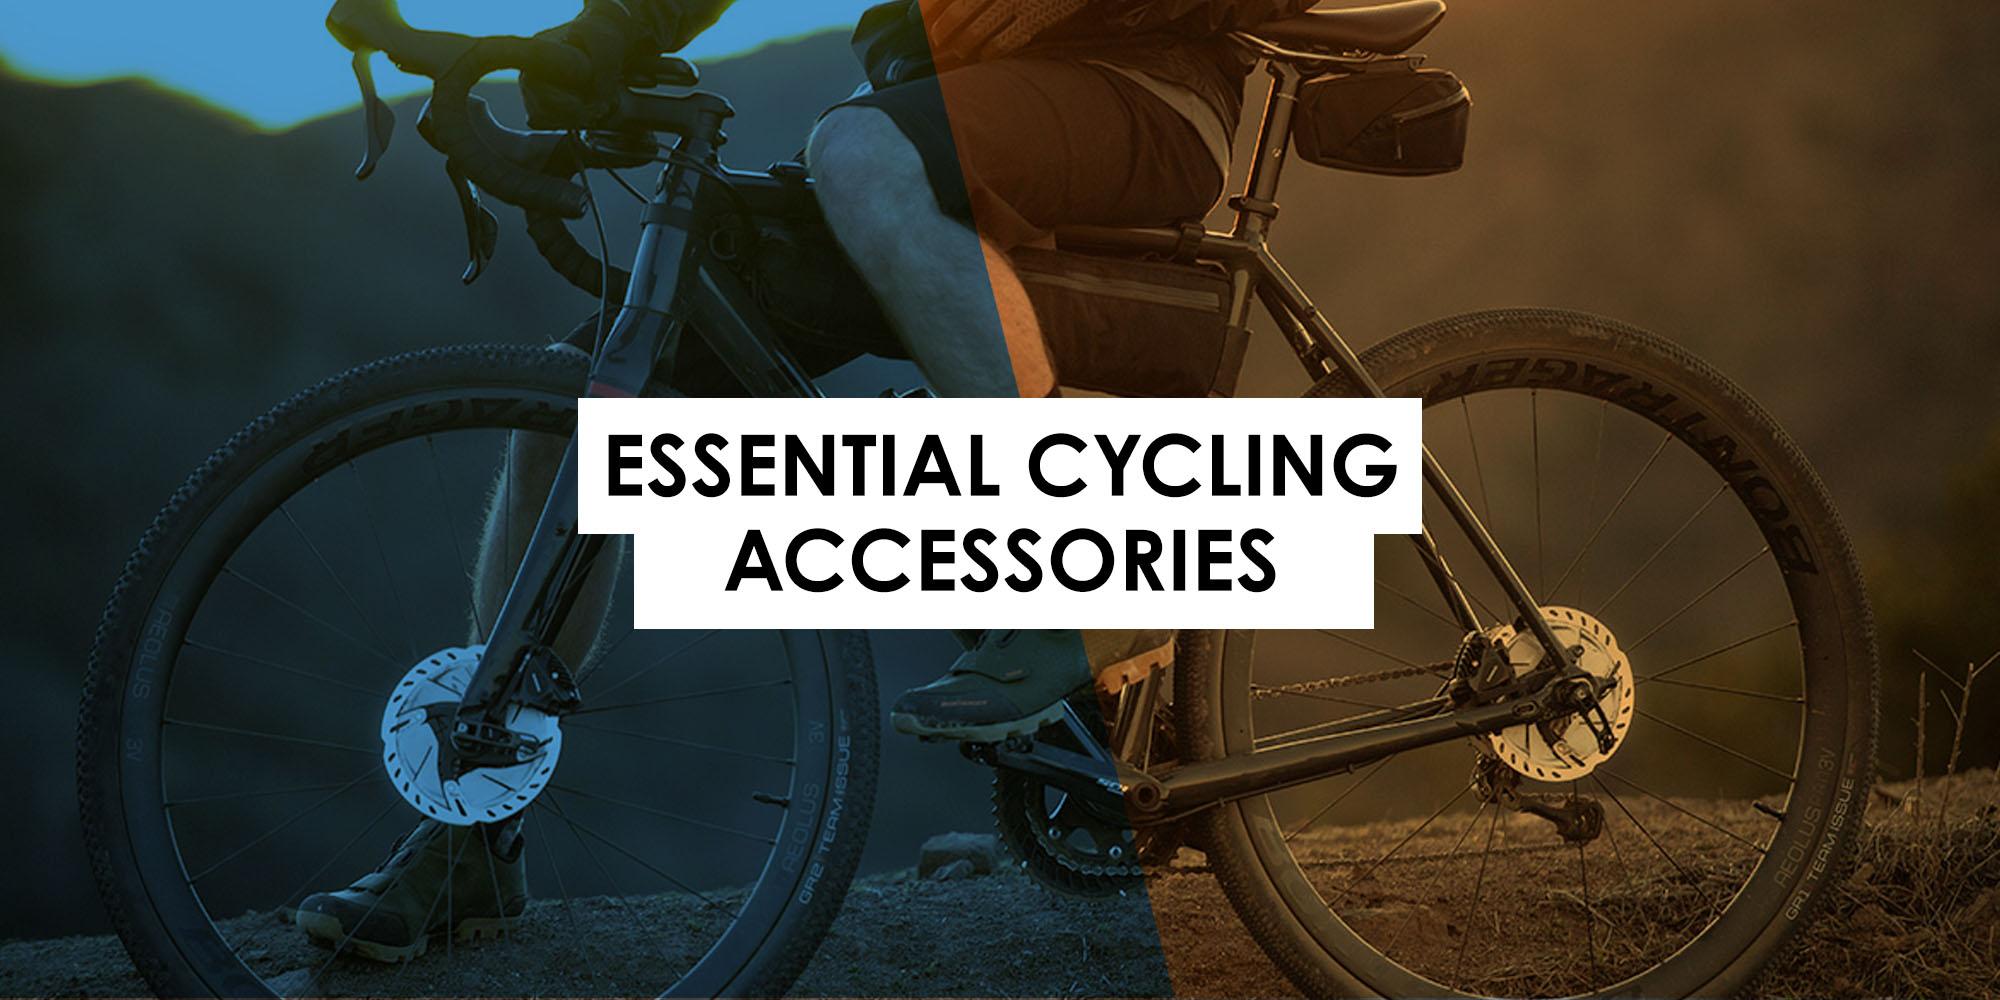 Essential Cycling Accessories